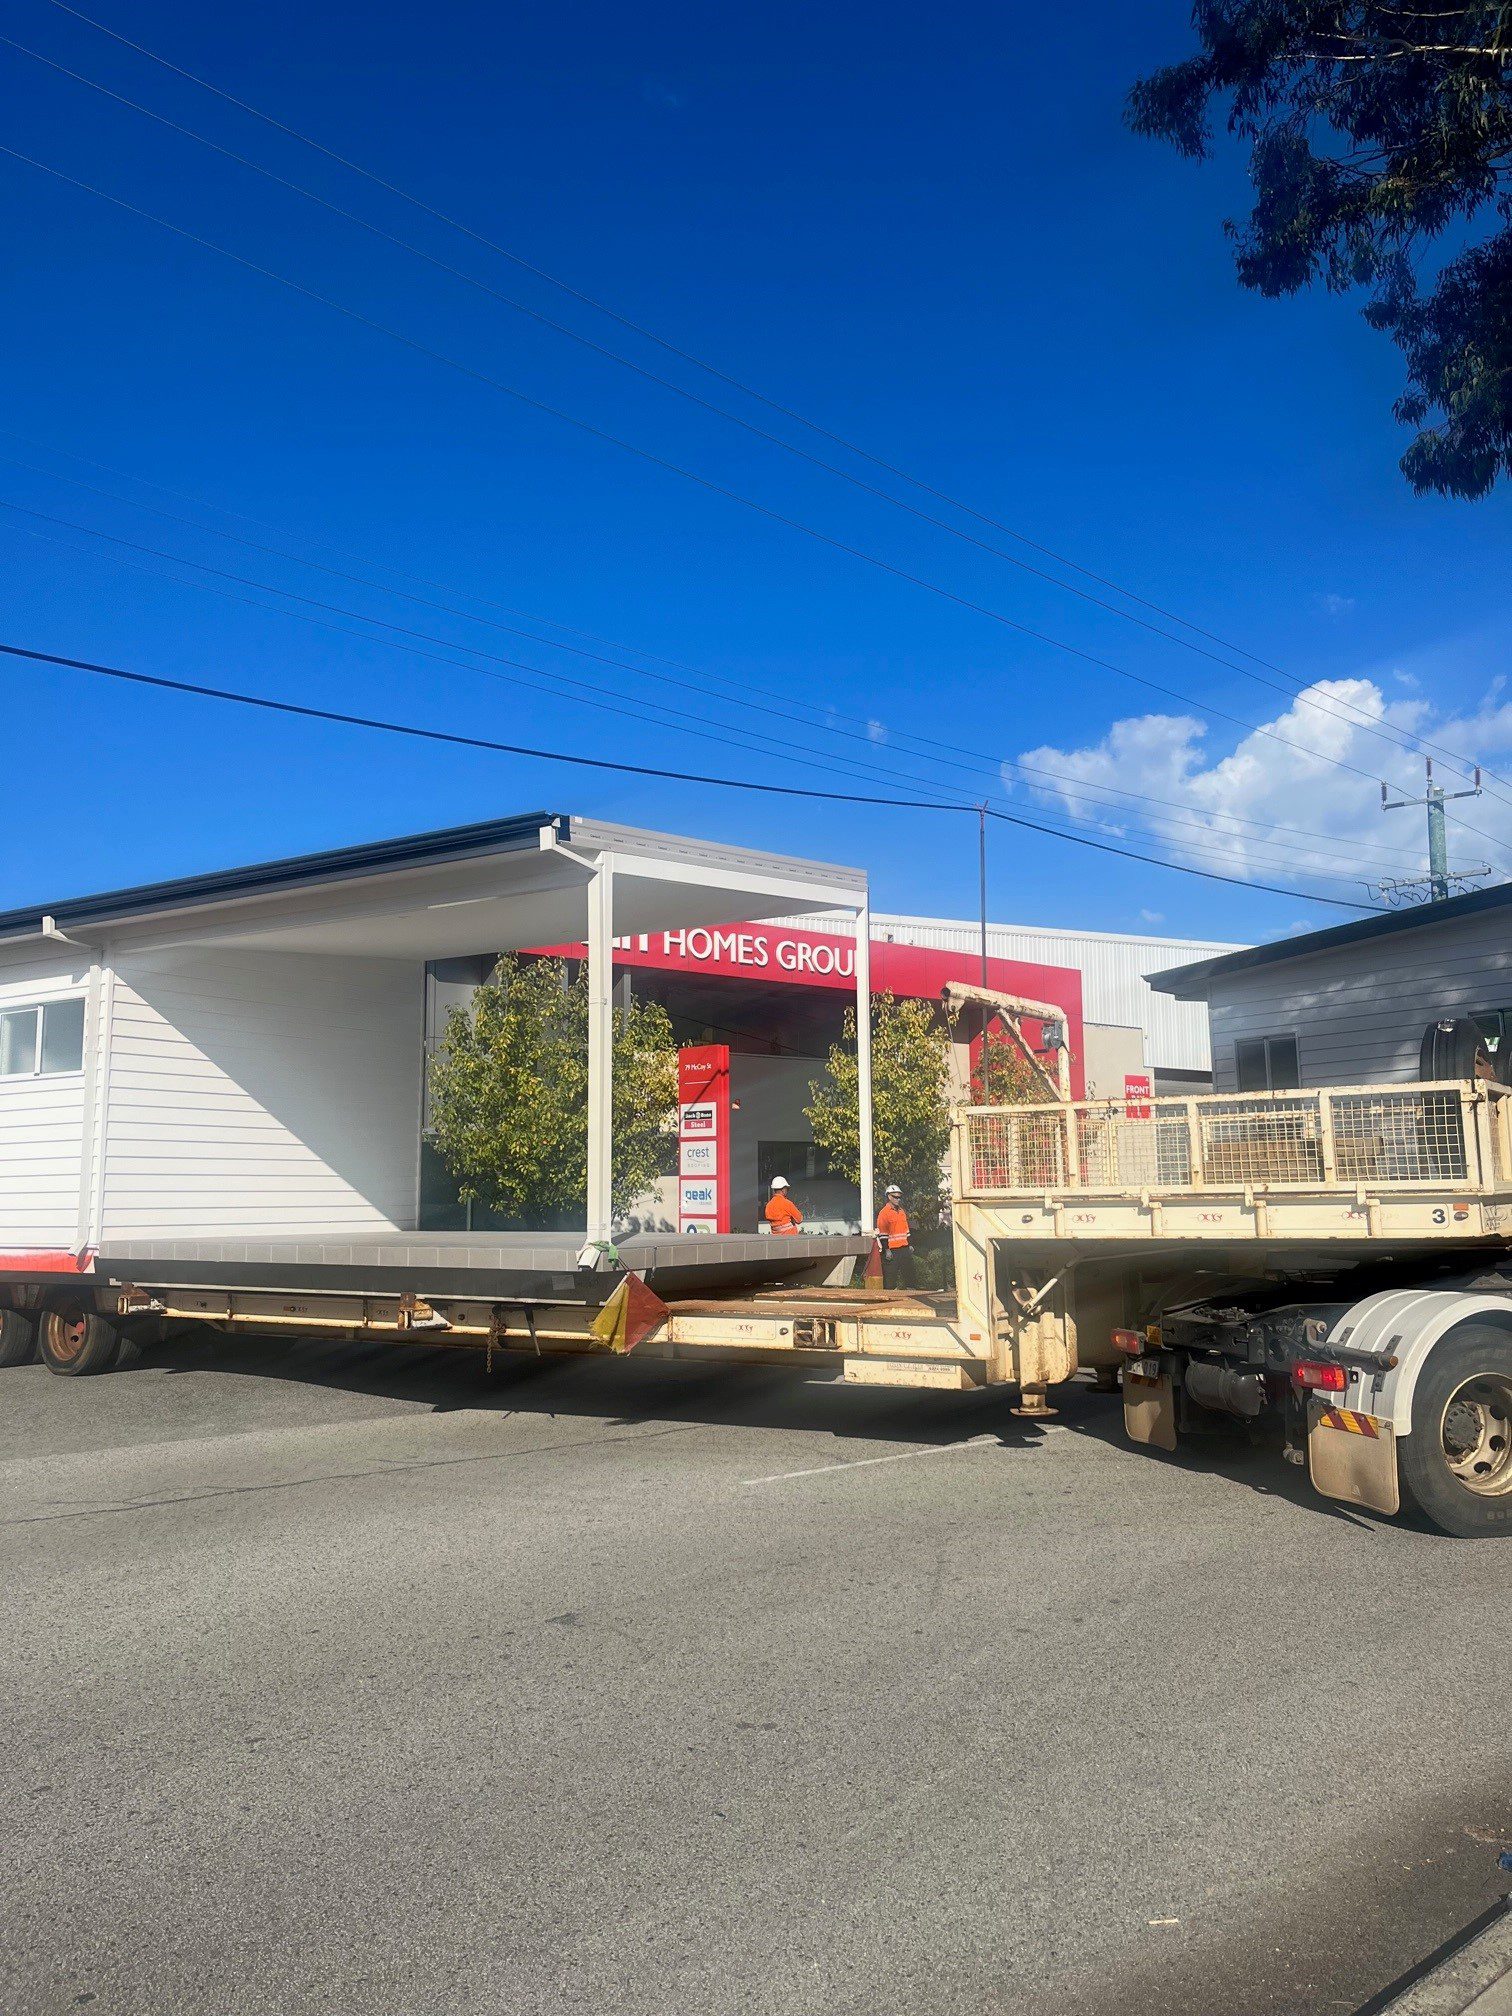 A new home being transported to the Edenlife Australind lifestyle community